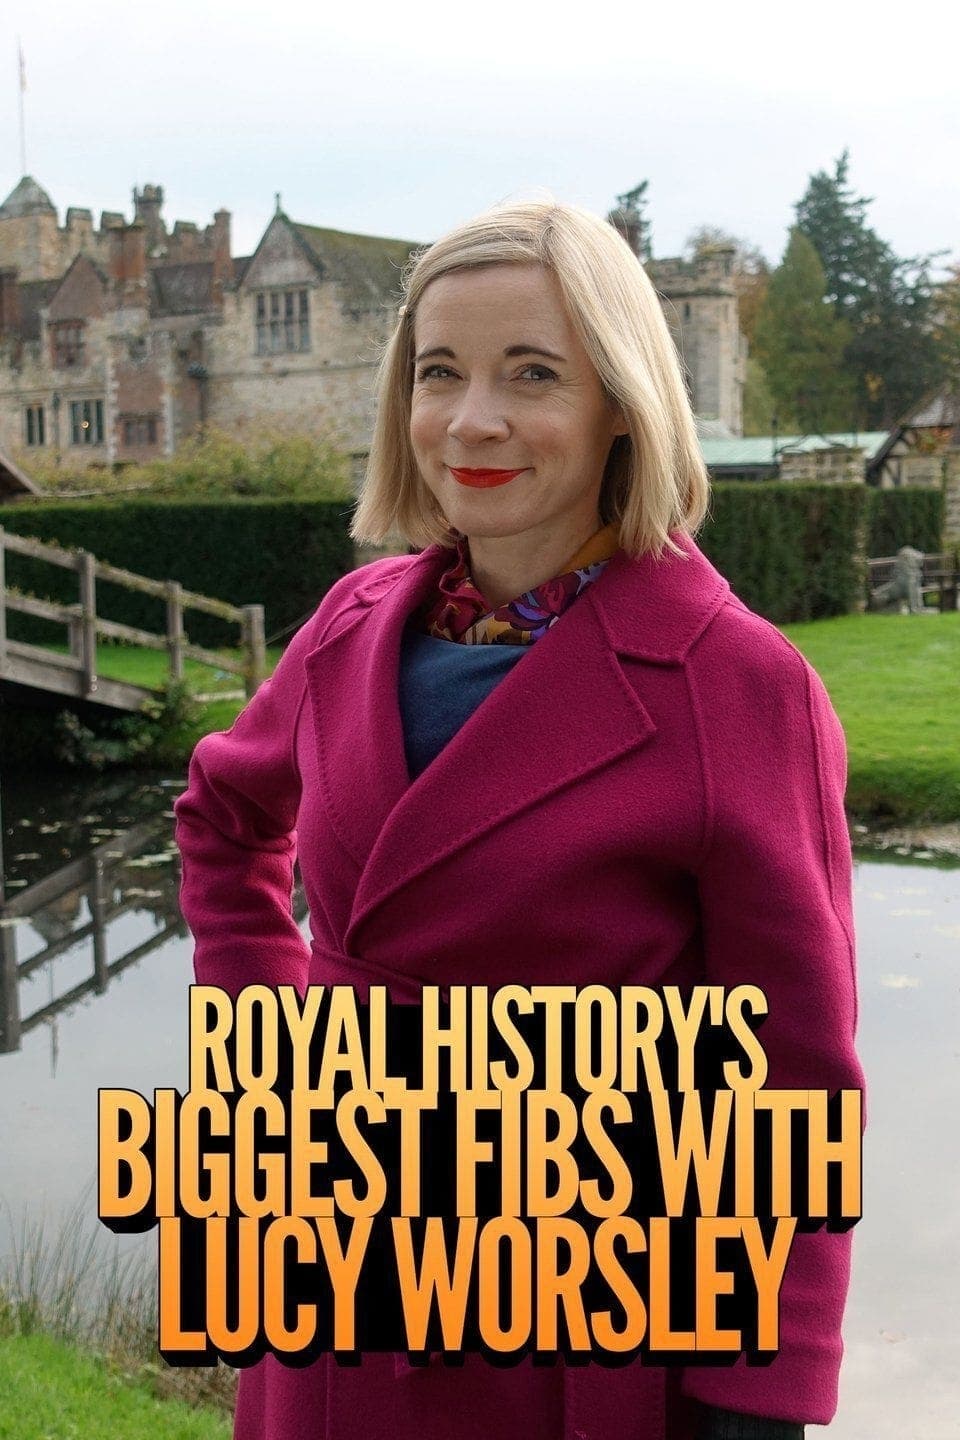 Royal History's Biggest Fibs with Lucy Worsley TV Shows About Monarchy